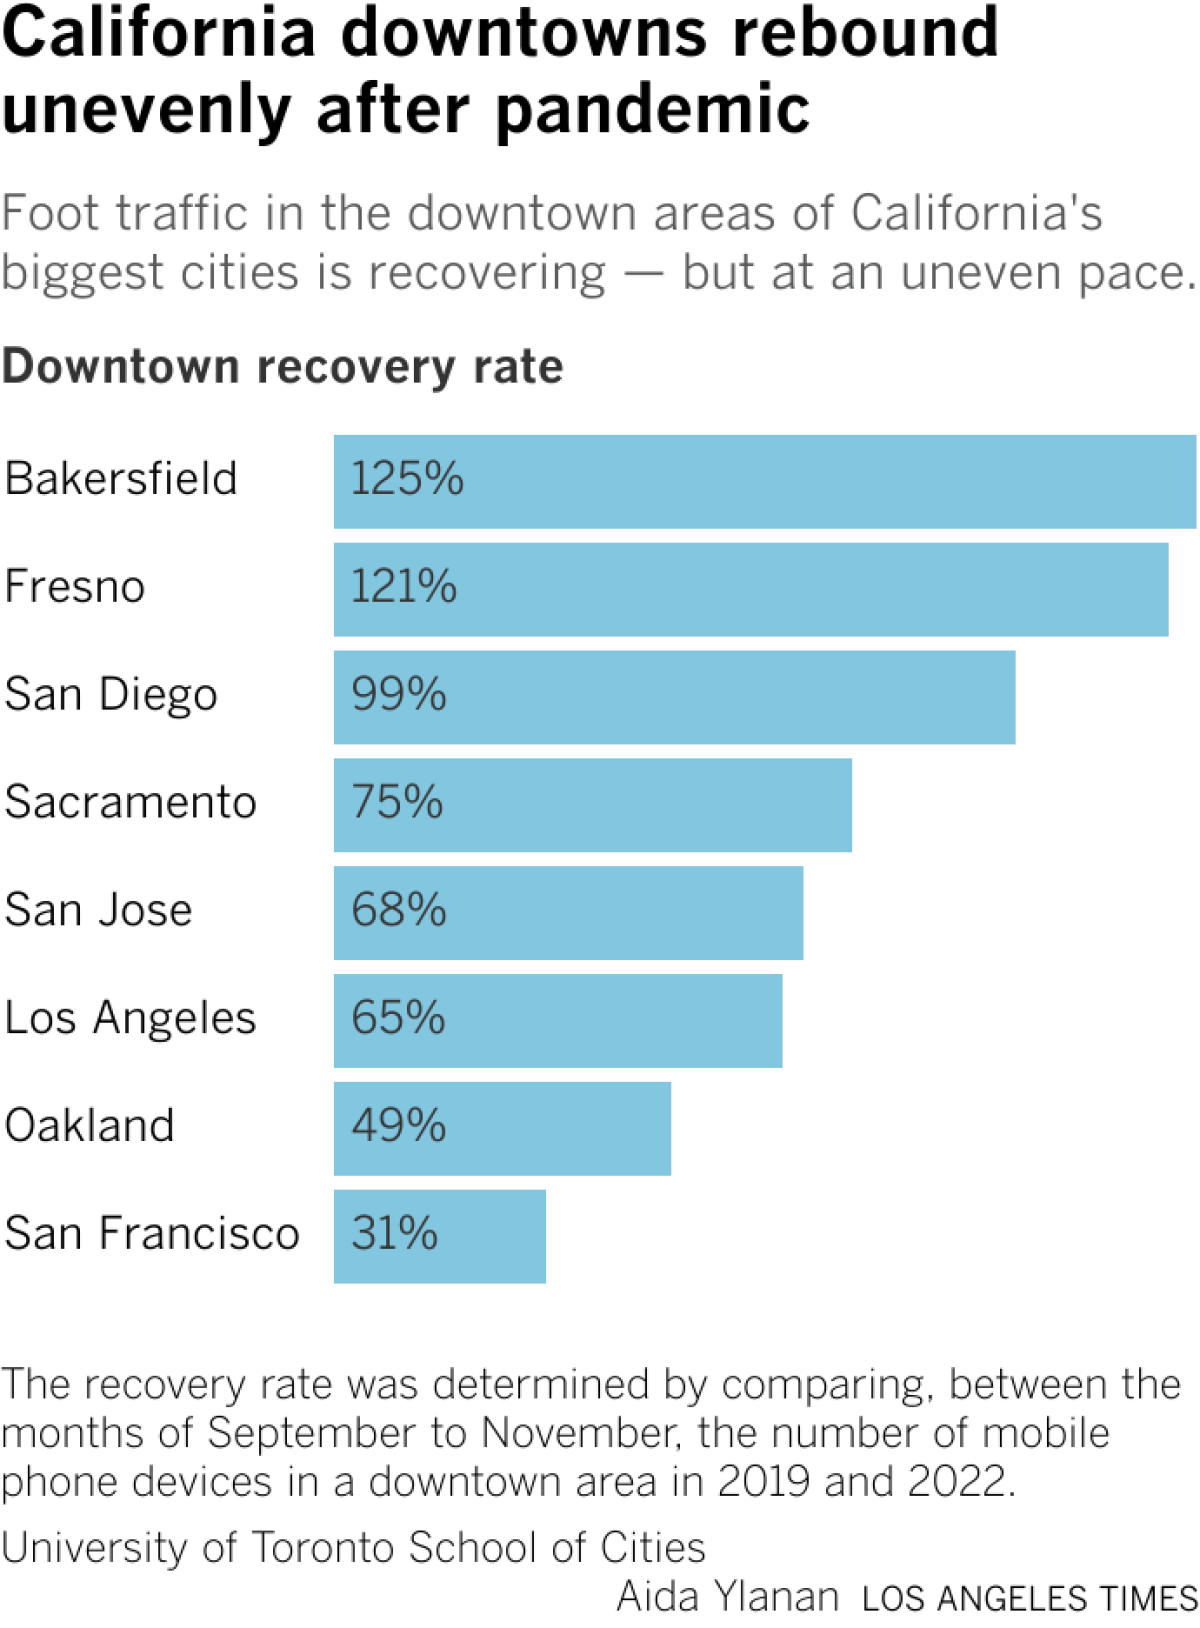 L.A. and other cities are recovering, but not their downtowns. Why